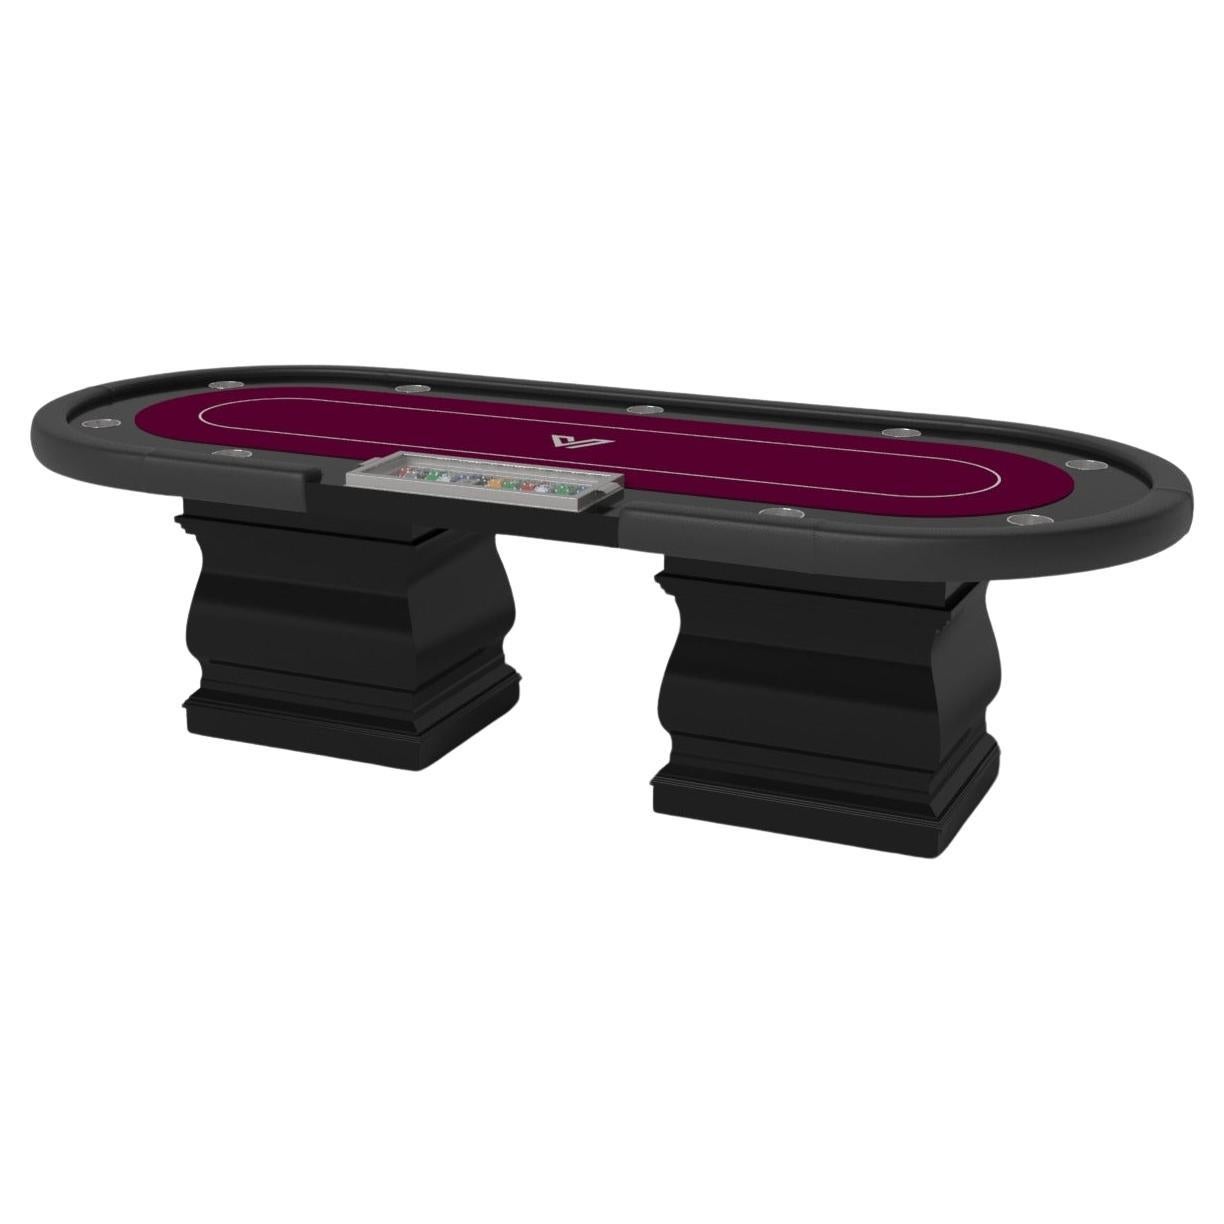 Elevate Customs Baluster Poker Tables / Solid Pantone Black Color in 8'8" - USA